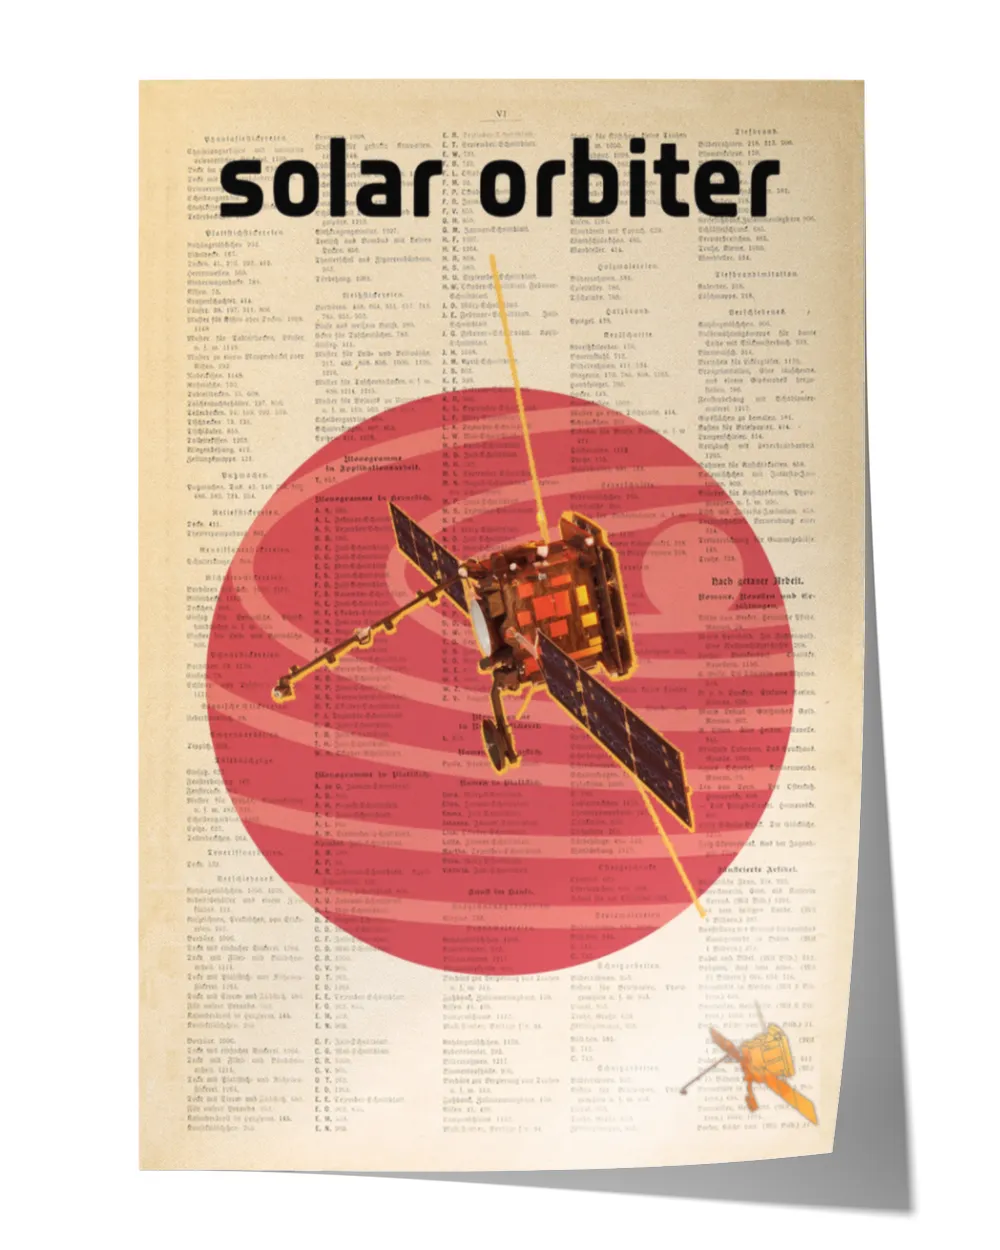 Solar Orbiter Sun Observing Satellite Vintage Poster,satellite And Space Exploration Poster, Space Wall Art